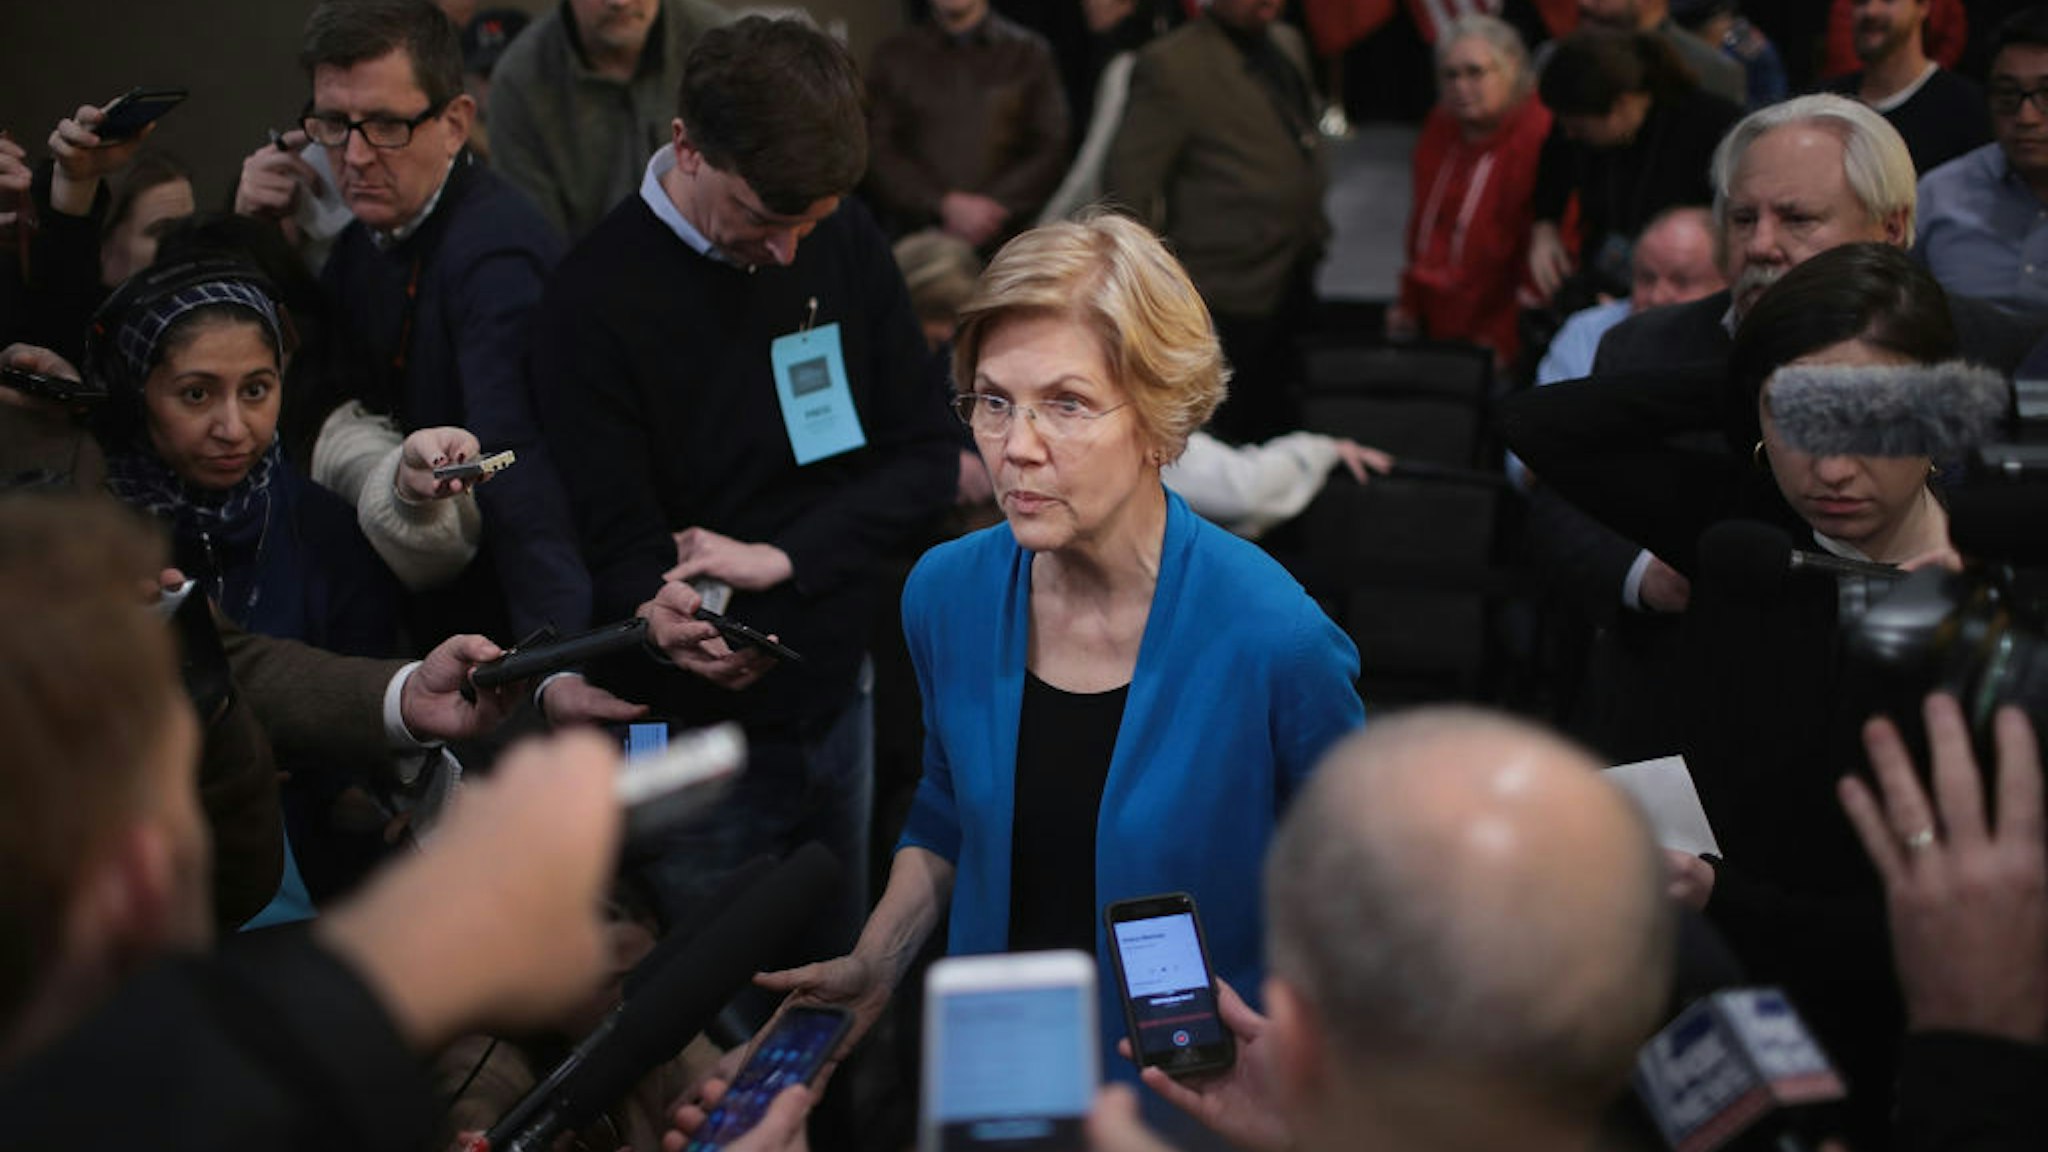 COUNCIL BLUFFS, IOWA - JANUARY 04: Sen. Elizabeth Warren (D-MA) speaks to reporters during a campaign stop at McCoy's Bar Patio and Grill on January 4, 2019 in Council Bluffs, Iowa. Warren announced on December 31 that she was forming an exploratory committee for the 2020 presidential race.